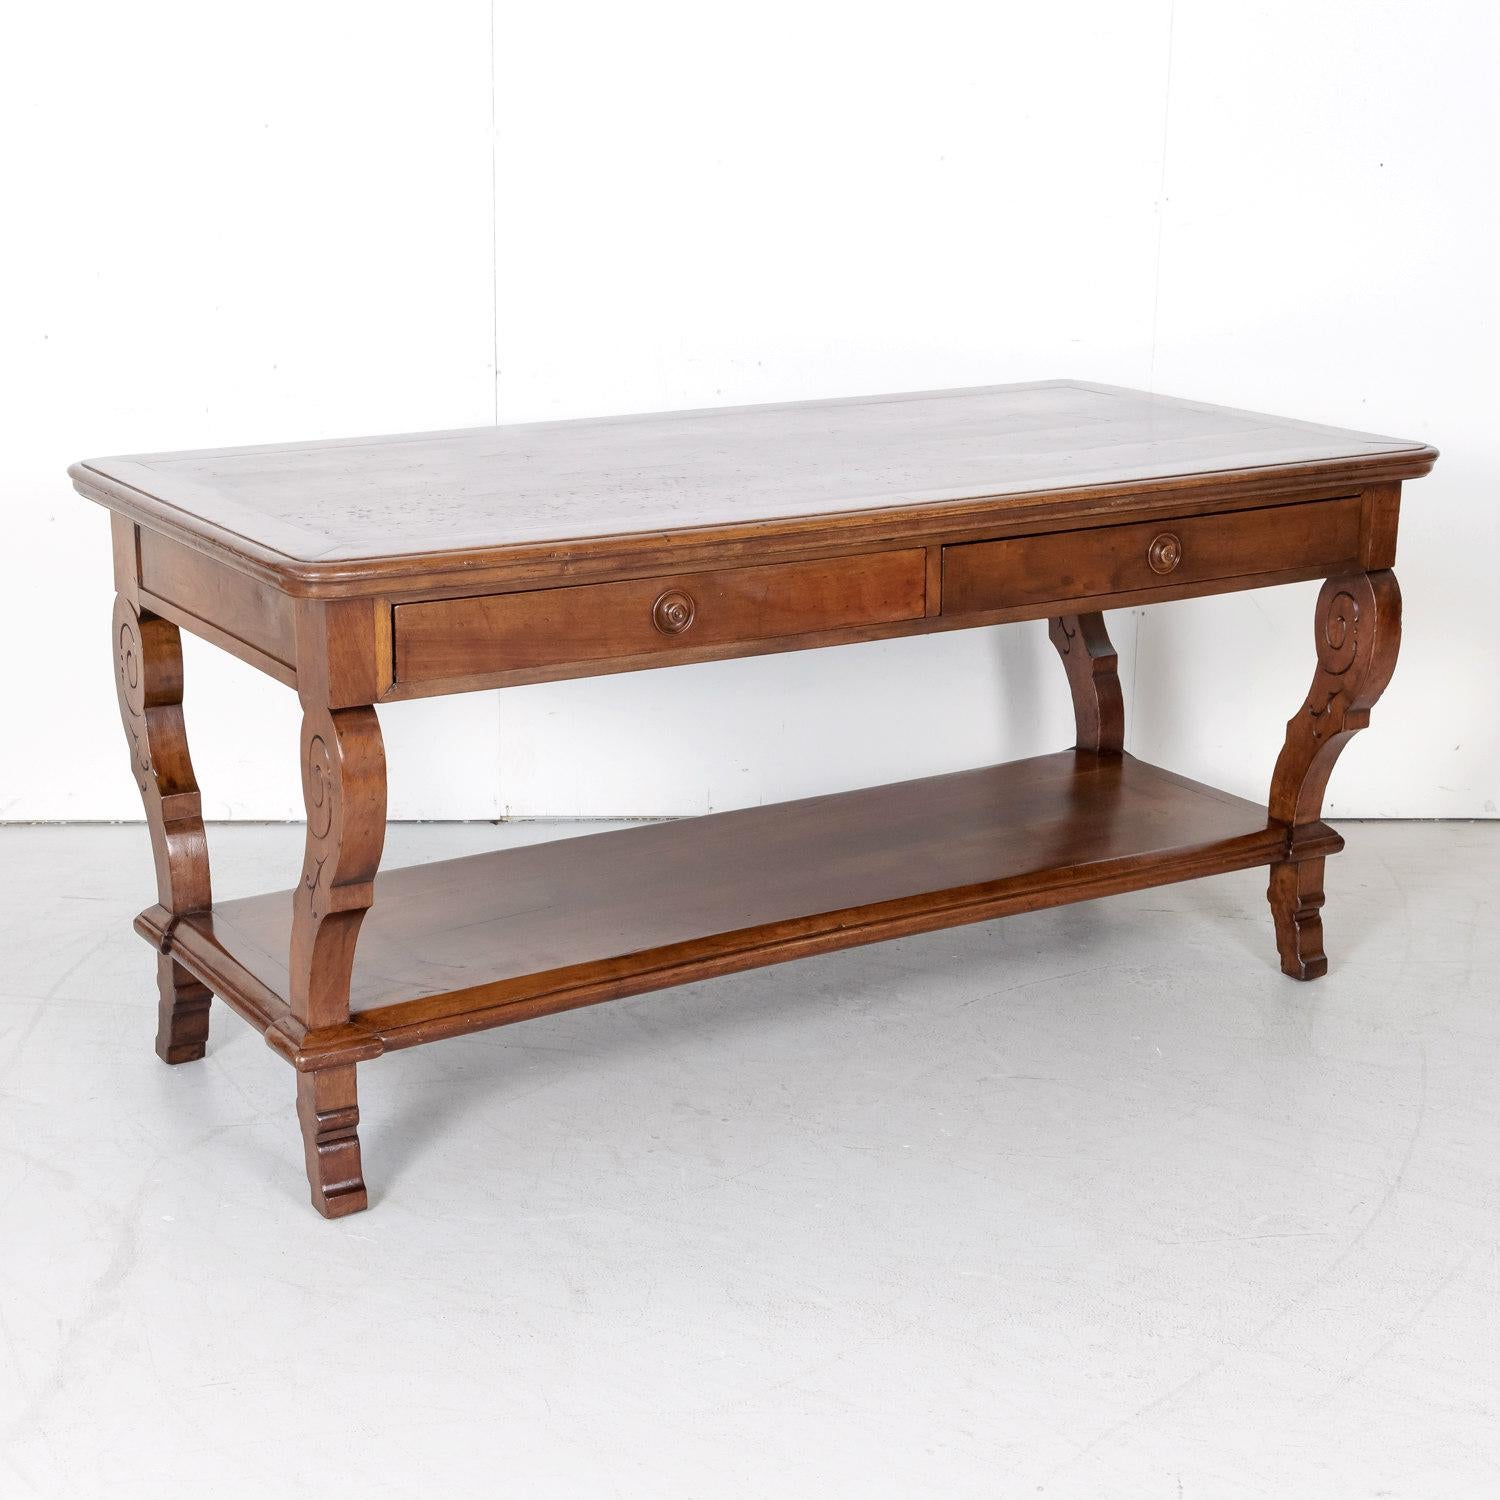 A fine late 18th century French Directoire period table de drapier from a draper's atelier in Lyon, circa 1790s. Handcrafted of solid walnut, this beautiful draper table, with its elegantly carved legs, was a common feature in the cloth merchant’s